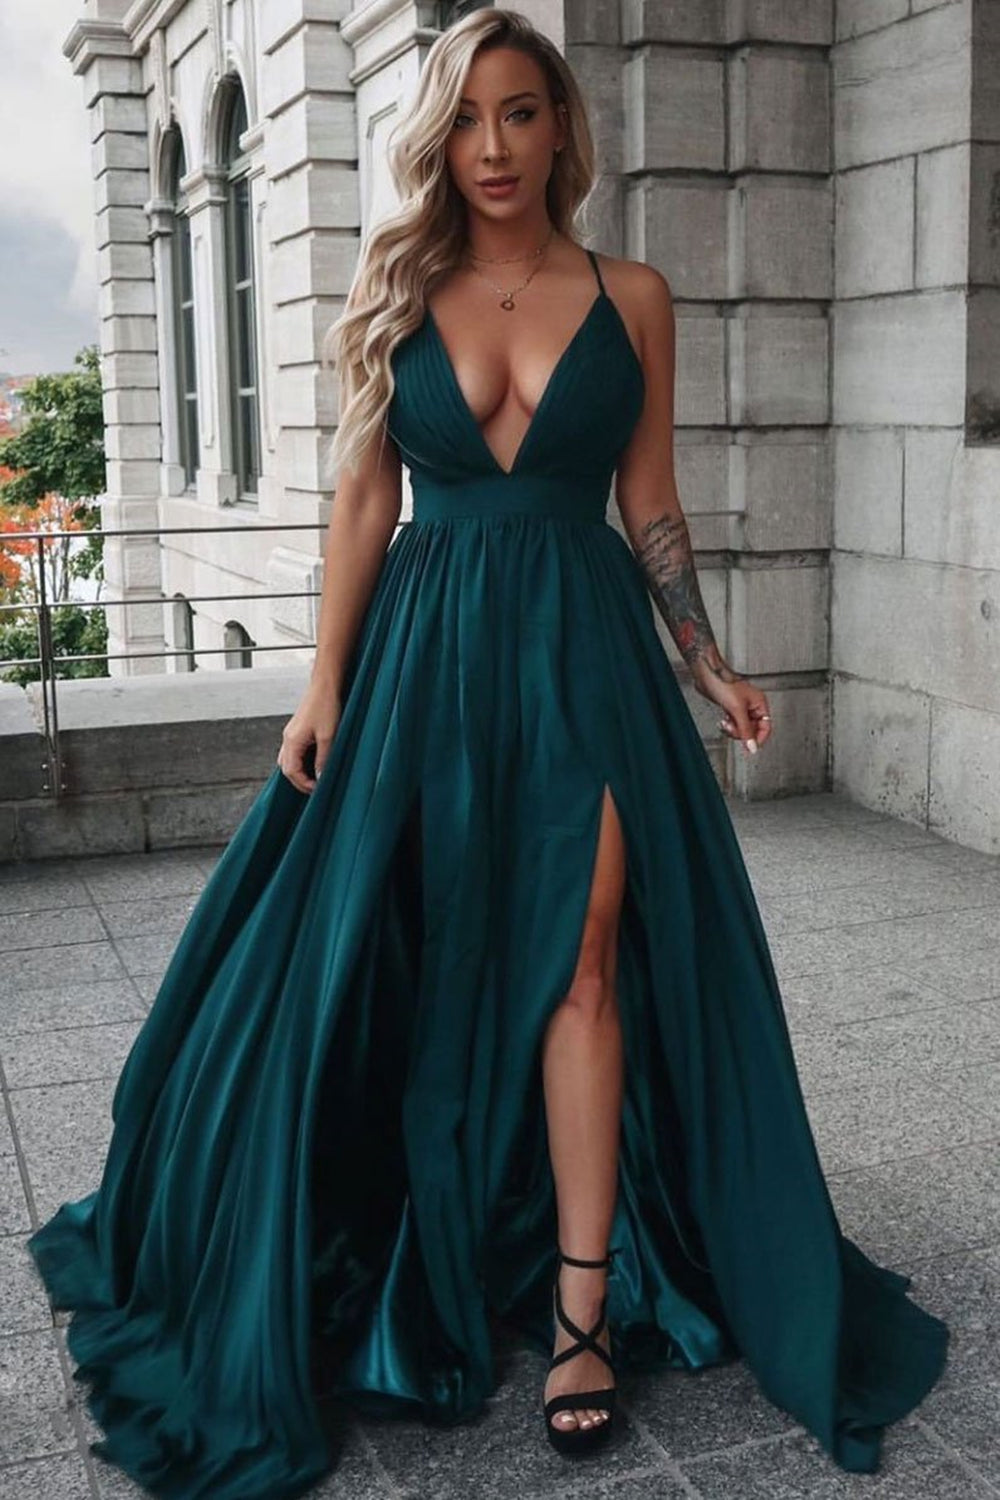 PinkBlush Forest Green Solid Off Shoulder Maternity Maxi Dress